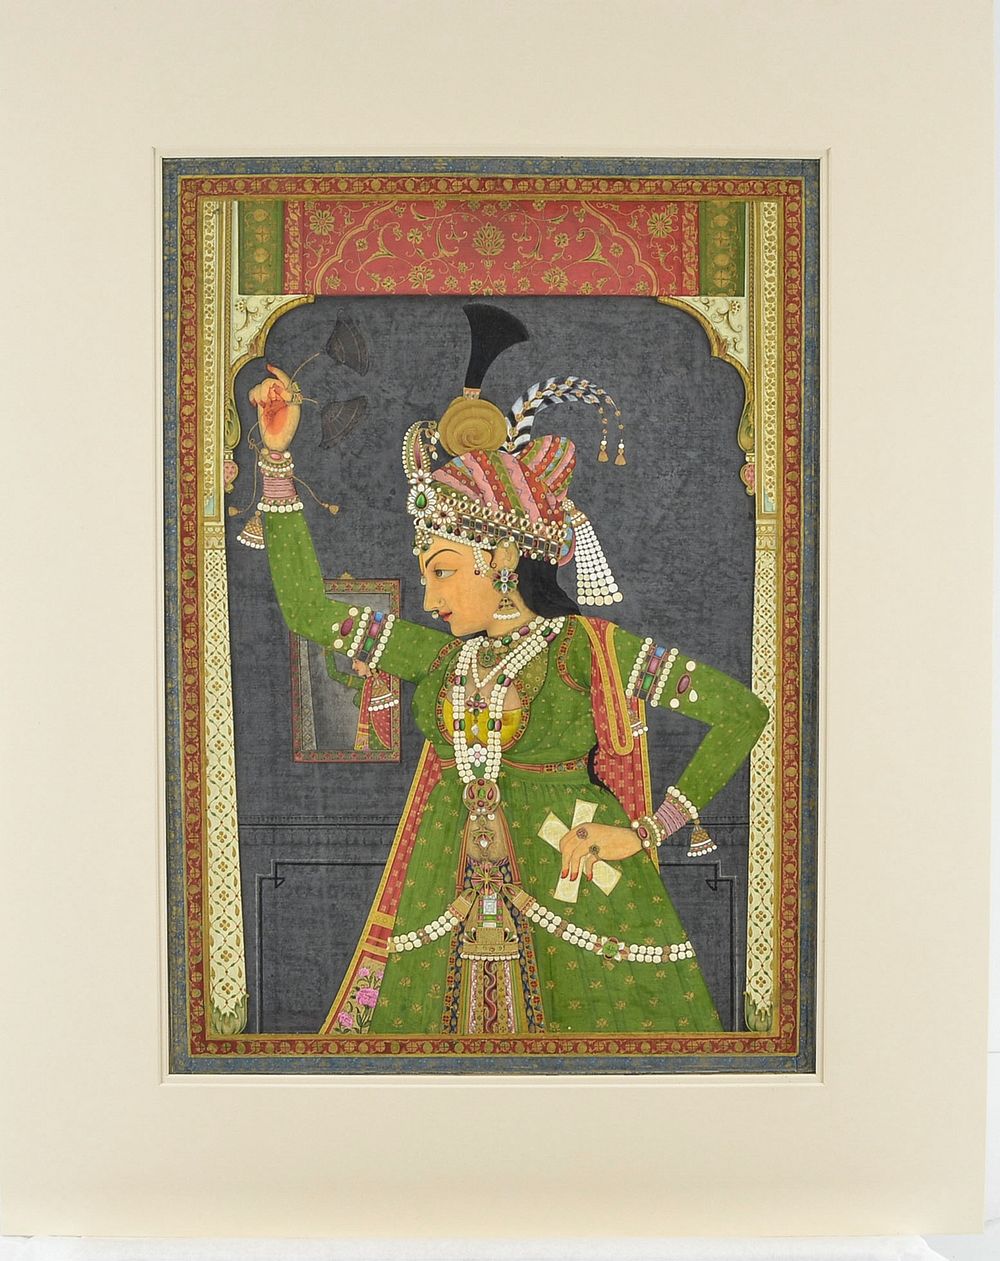 A Woman of the Court Dressed as Radha, attributed to Ramji